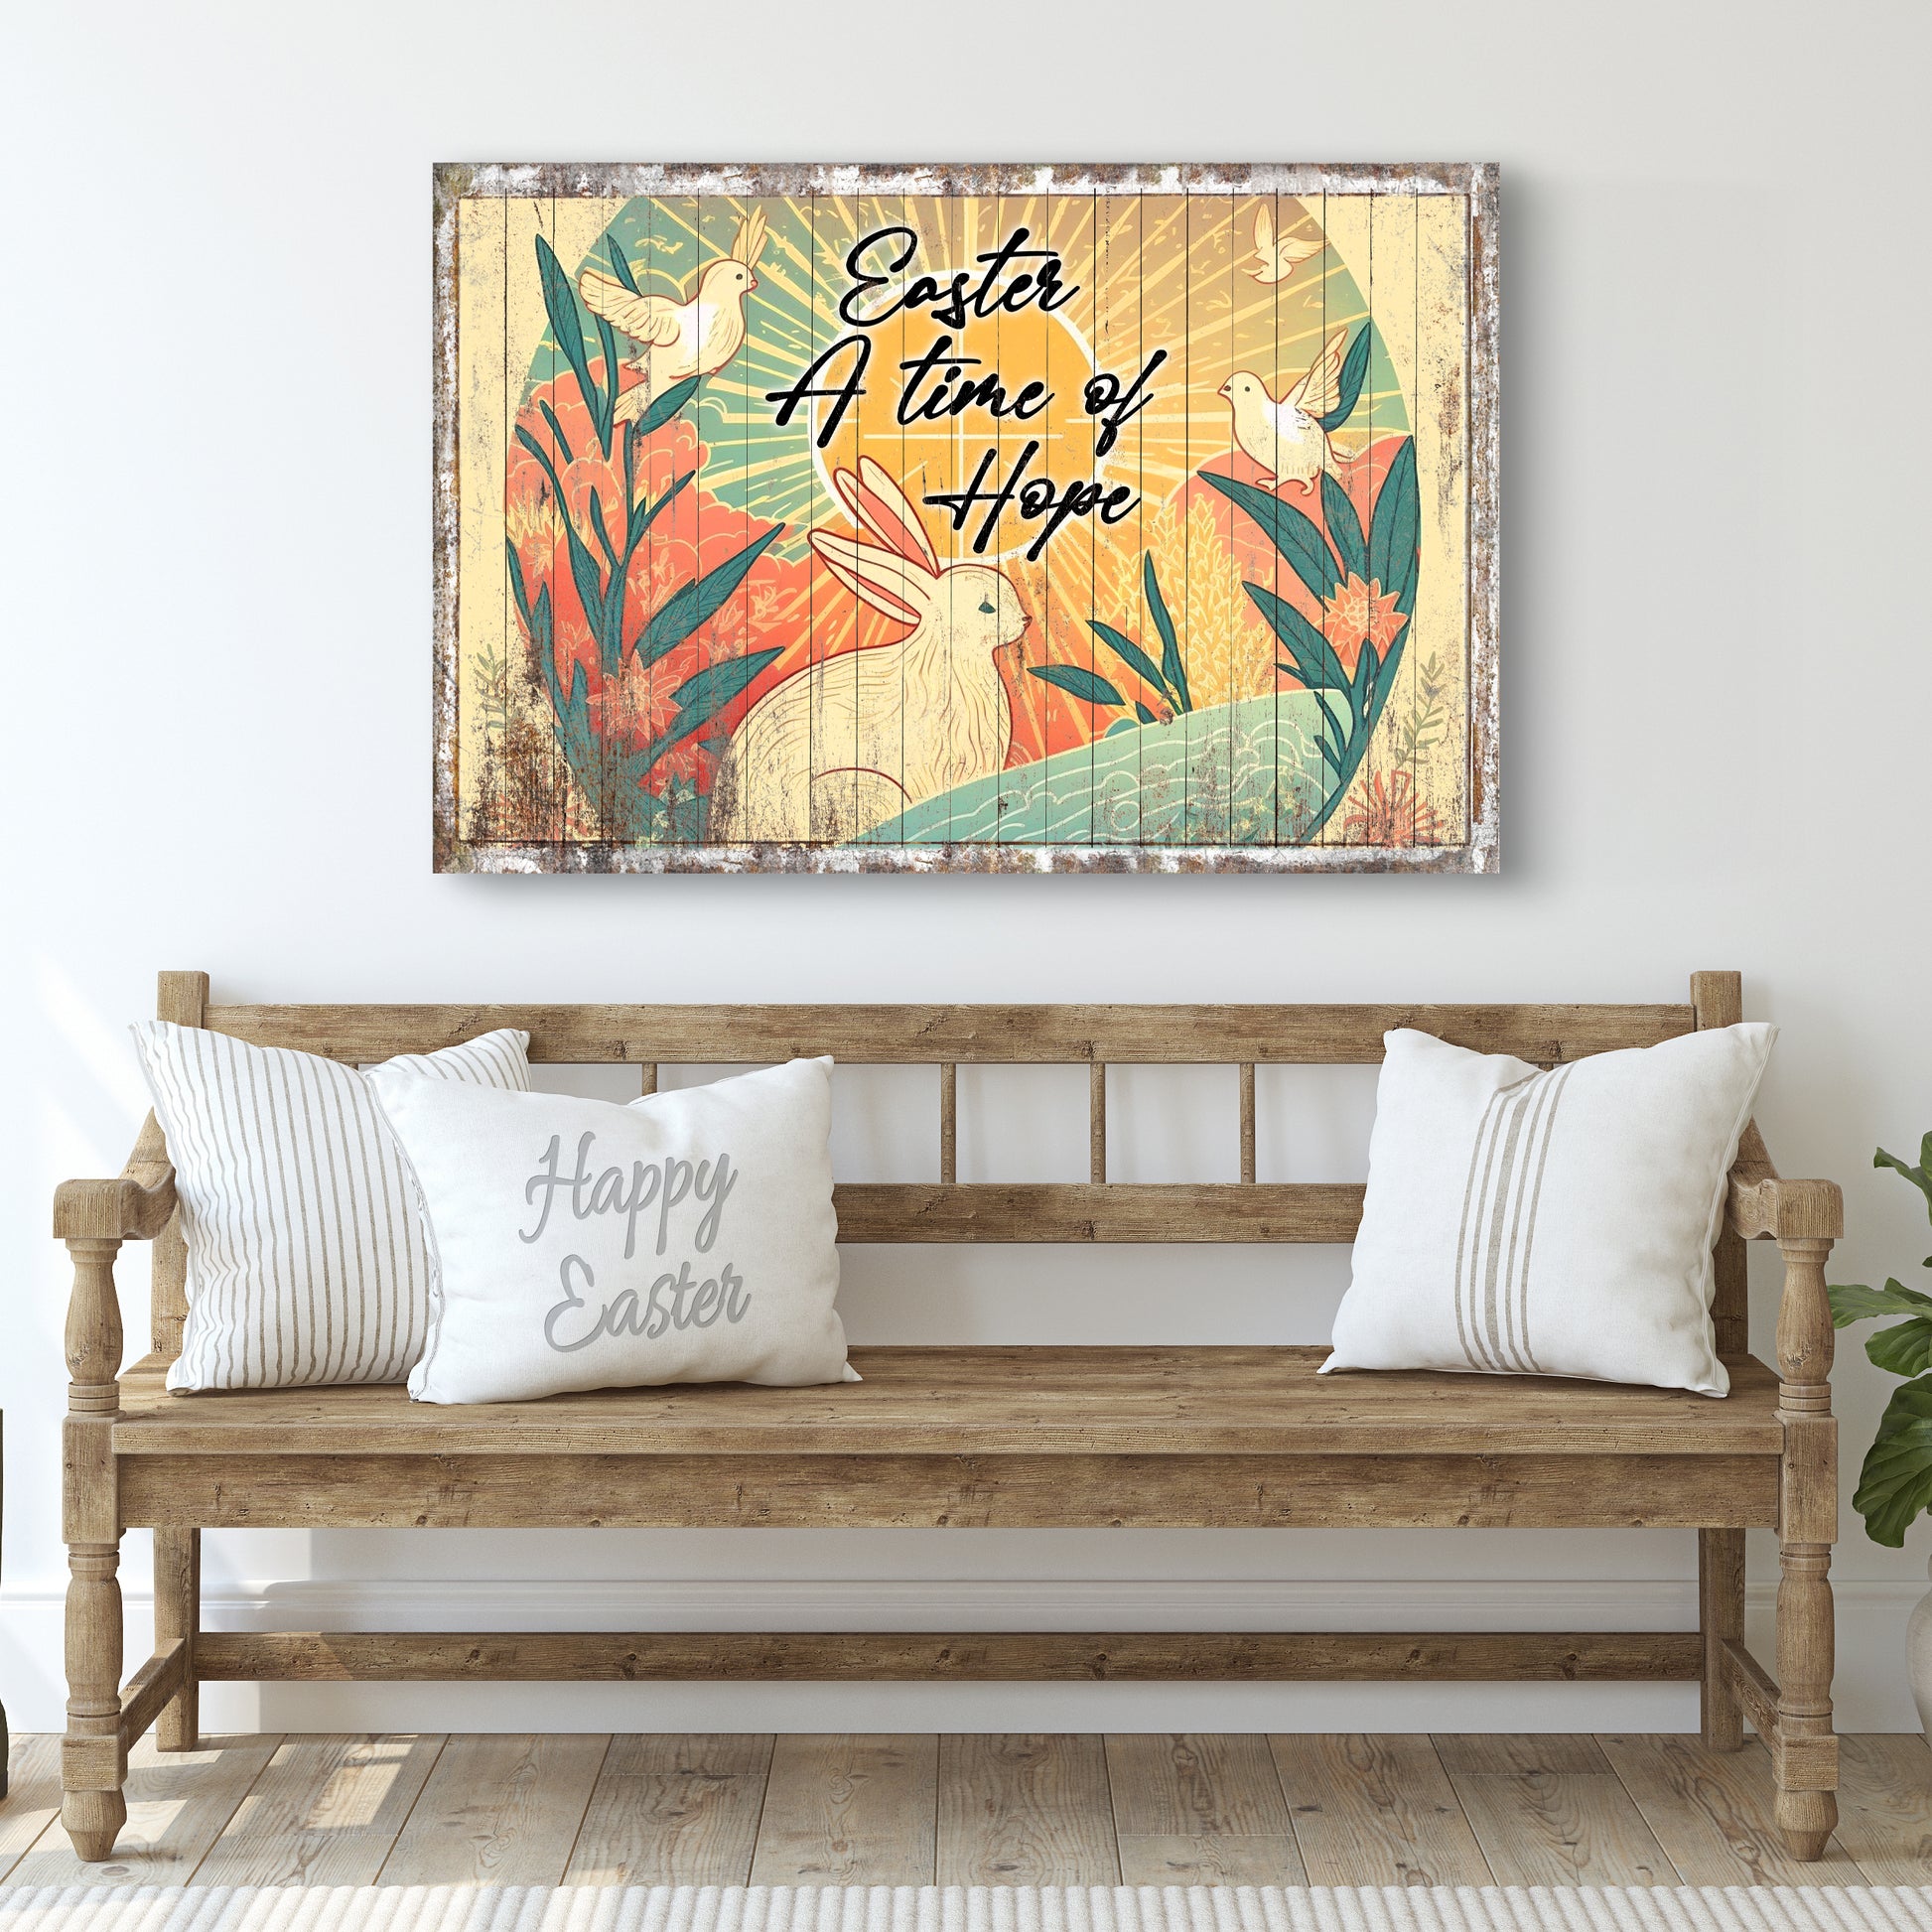 Easter A Time Of Hope Sign  - Image by Tailored Canvases